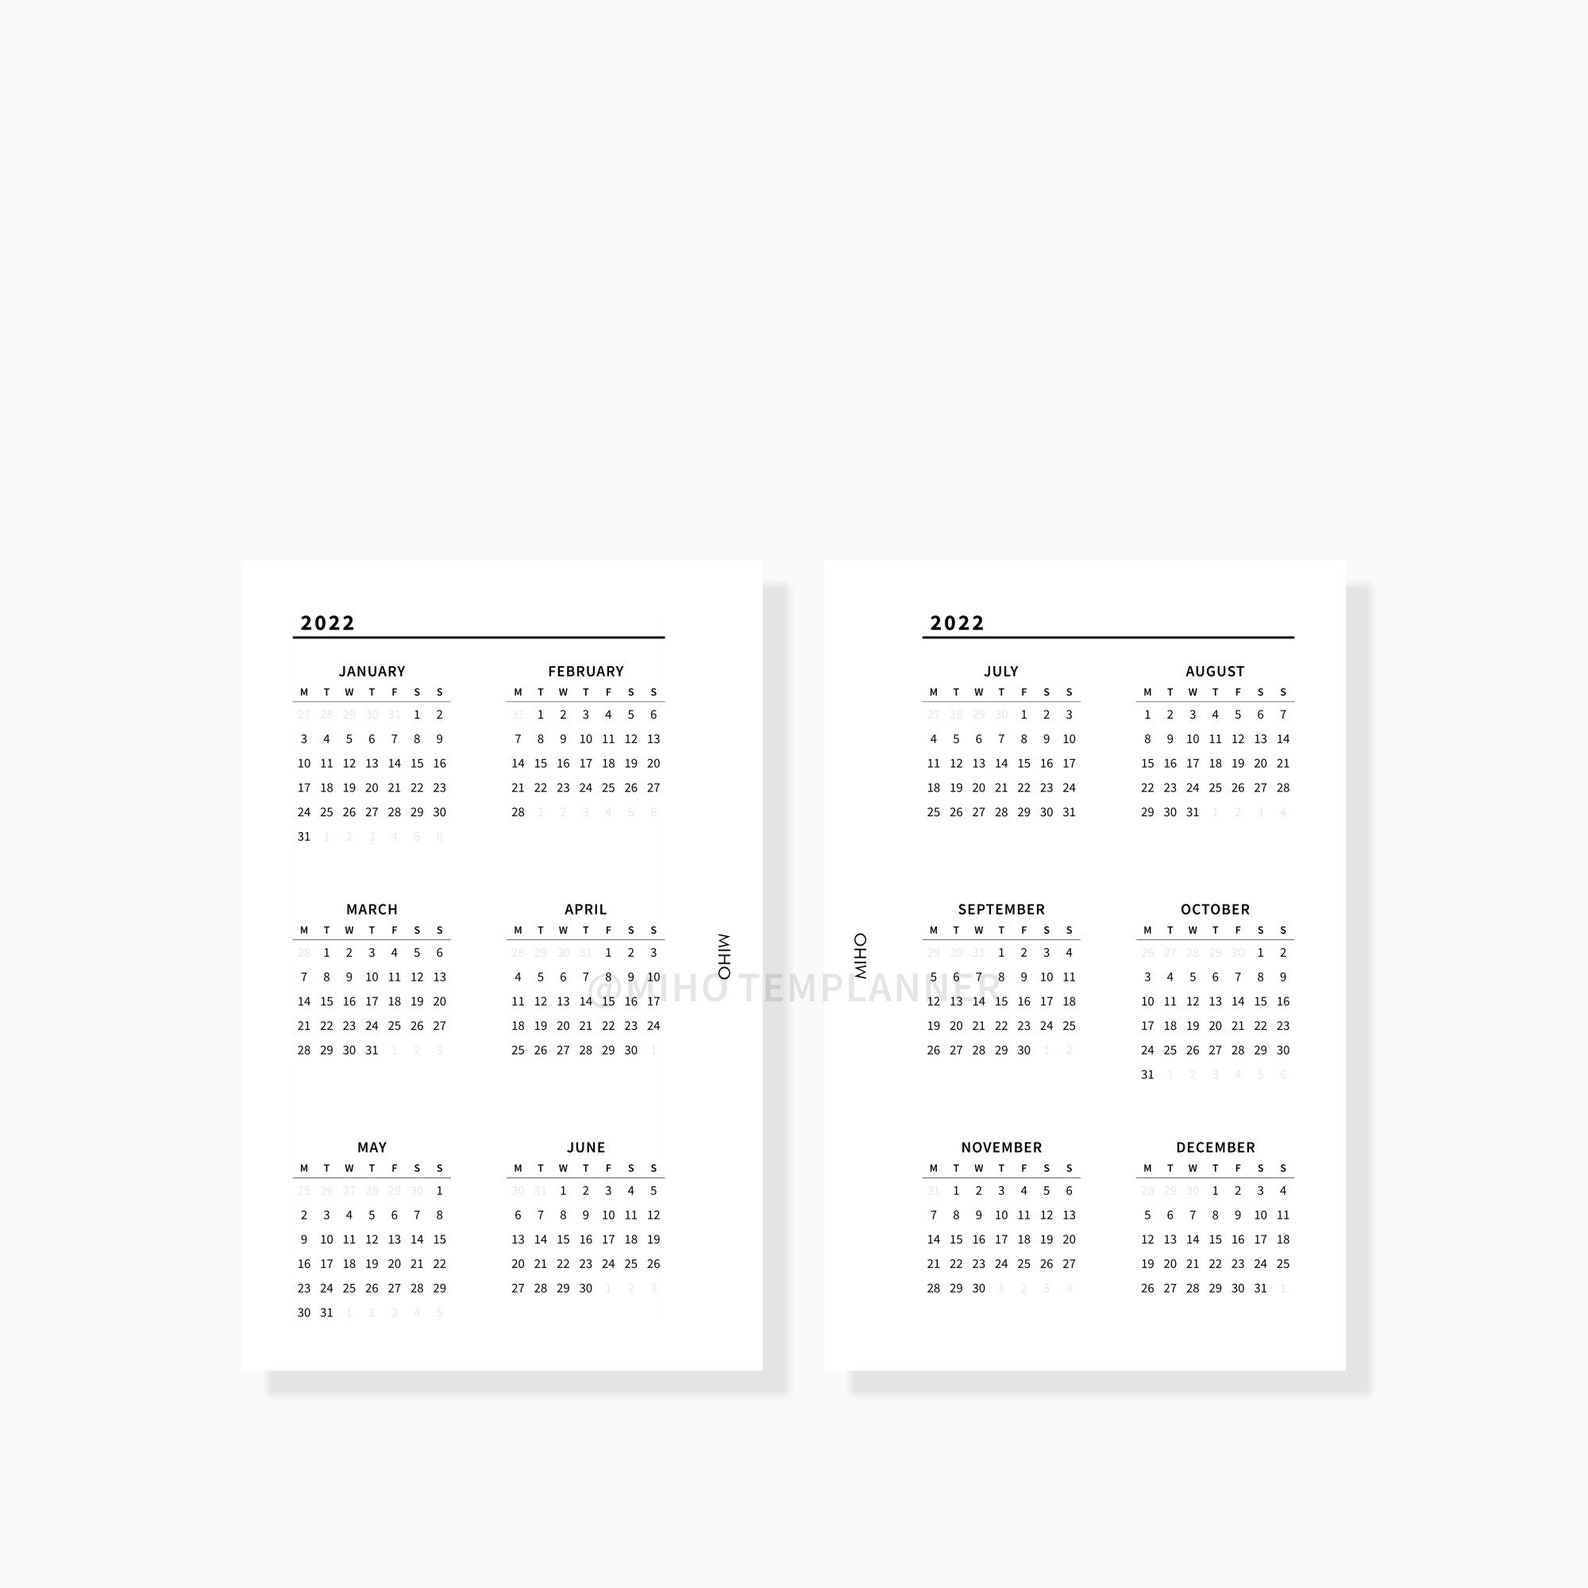 2022 Calendar Printable Year At A Glance Yearly Overview